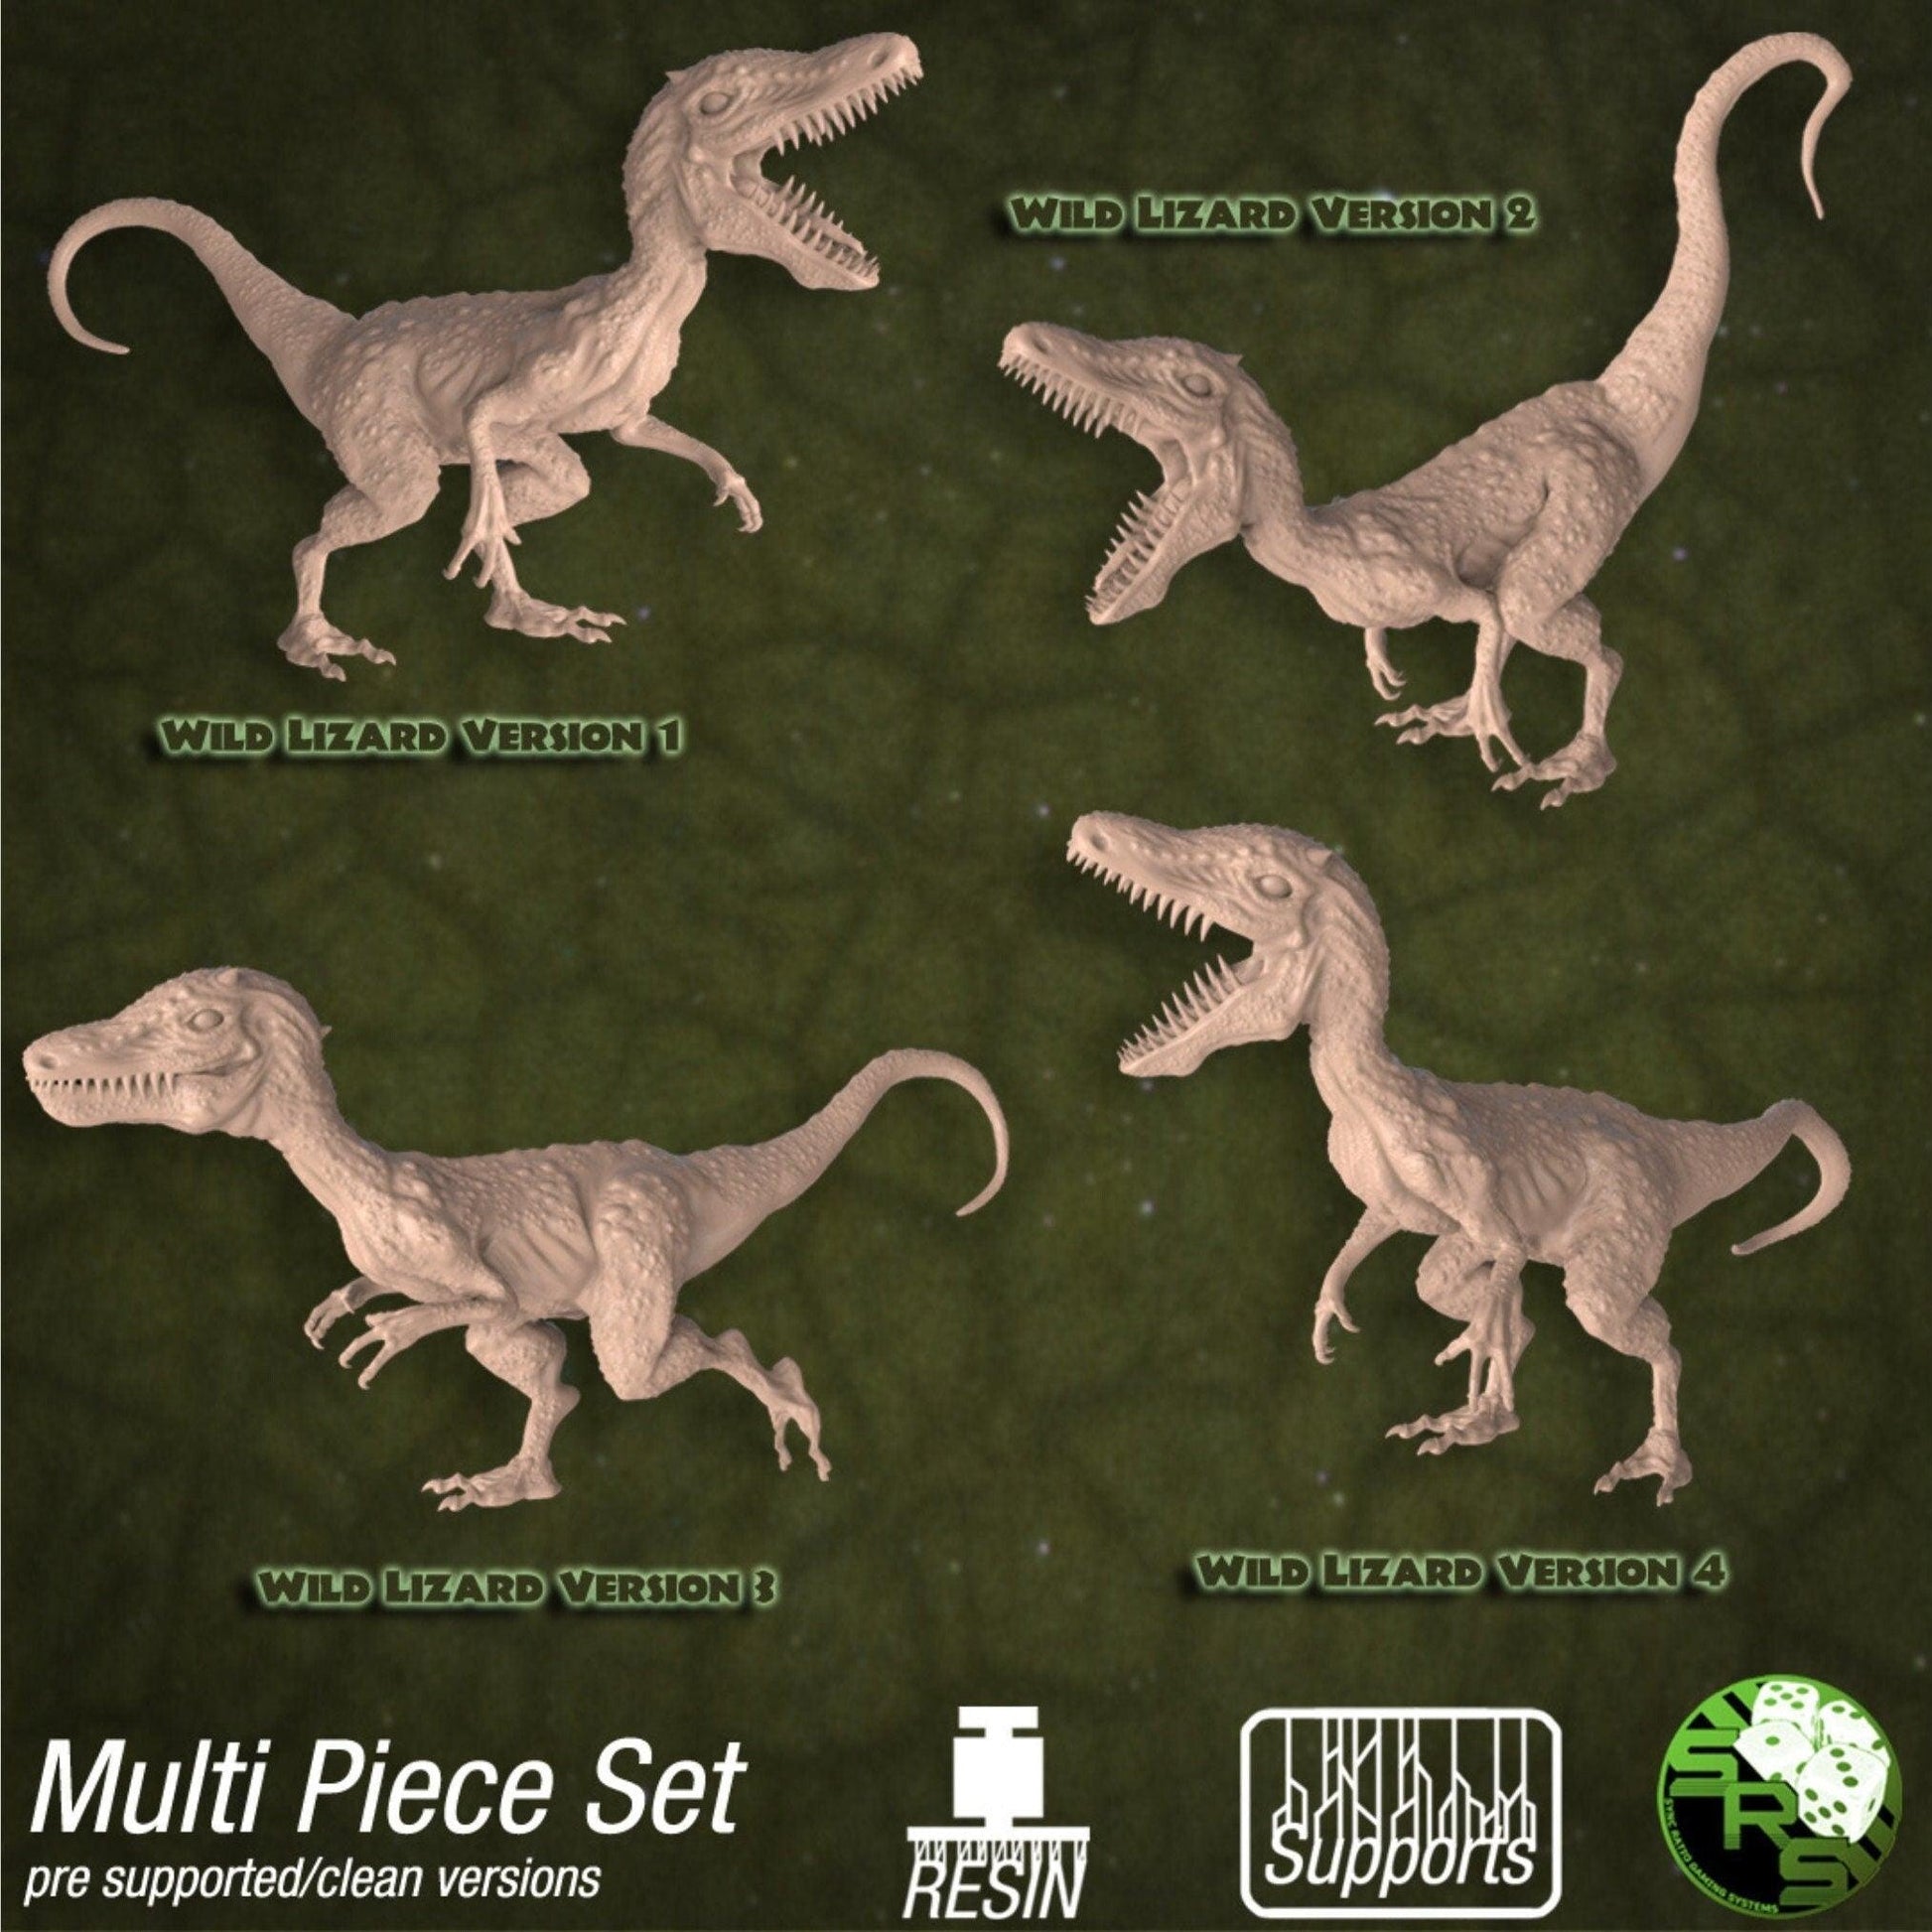 DnD Wild Lizard Miniature - 25mm base | 32mm scale | Tabletop gaming DnD Miniature Dungeons and Dragons,dnd monster manual - Plague Miniatures shop for DnD Miniatures